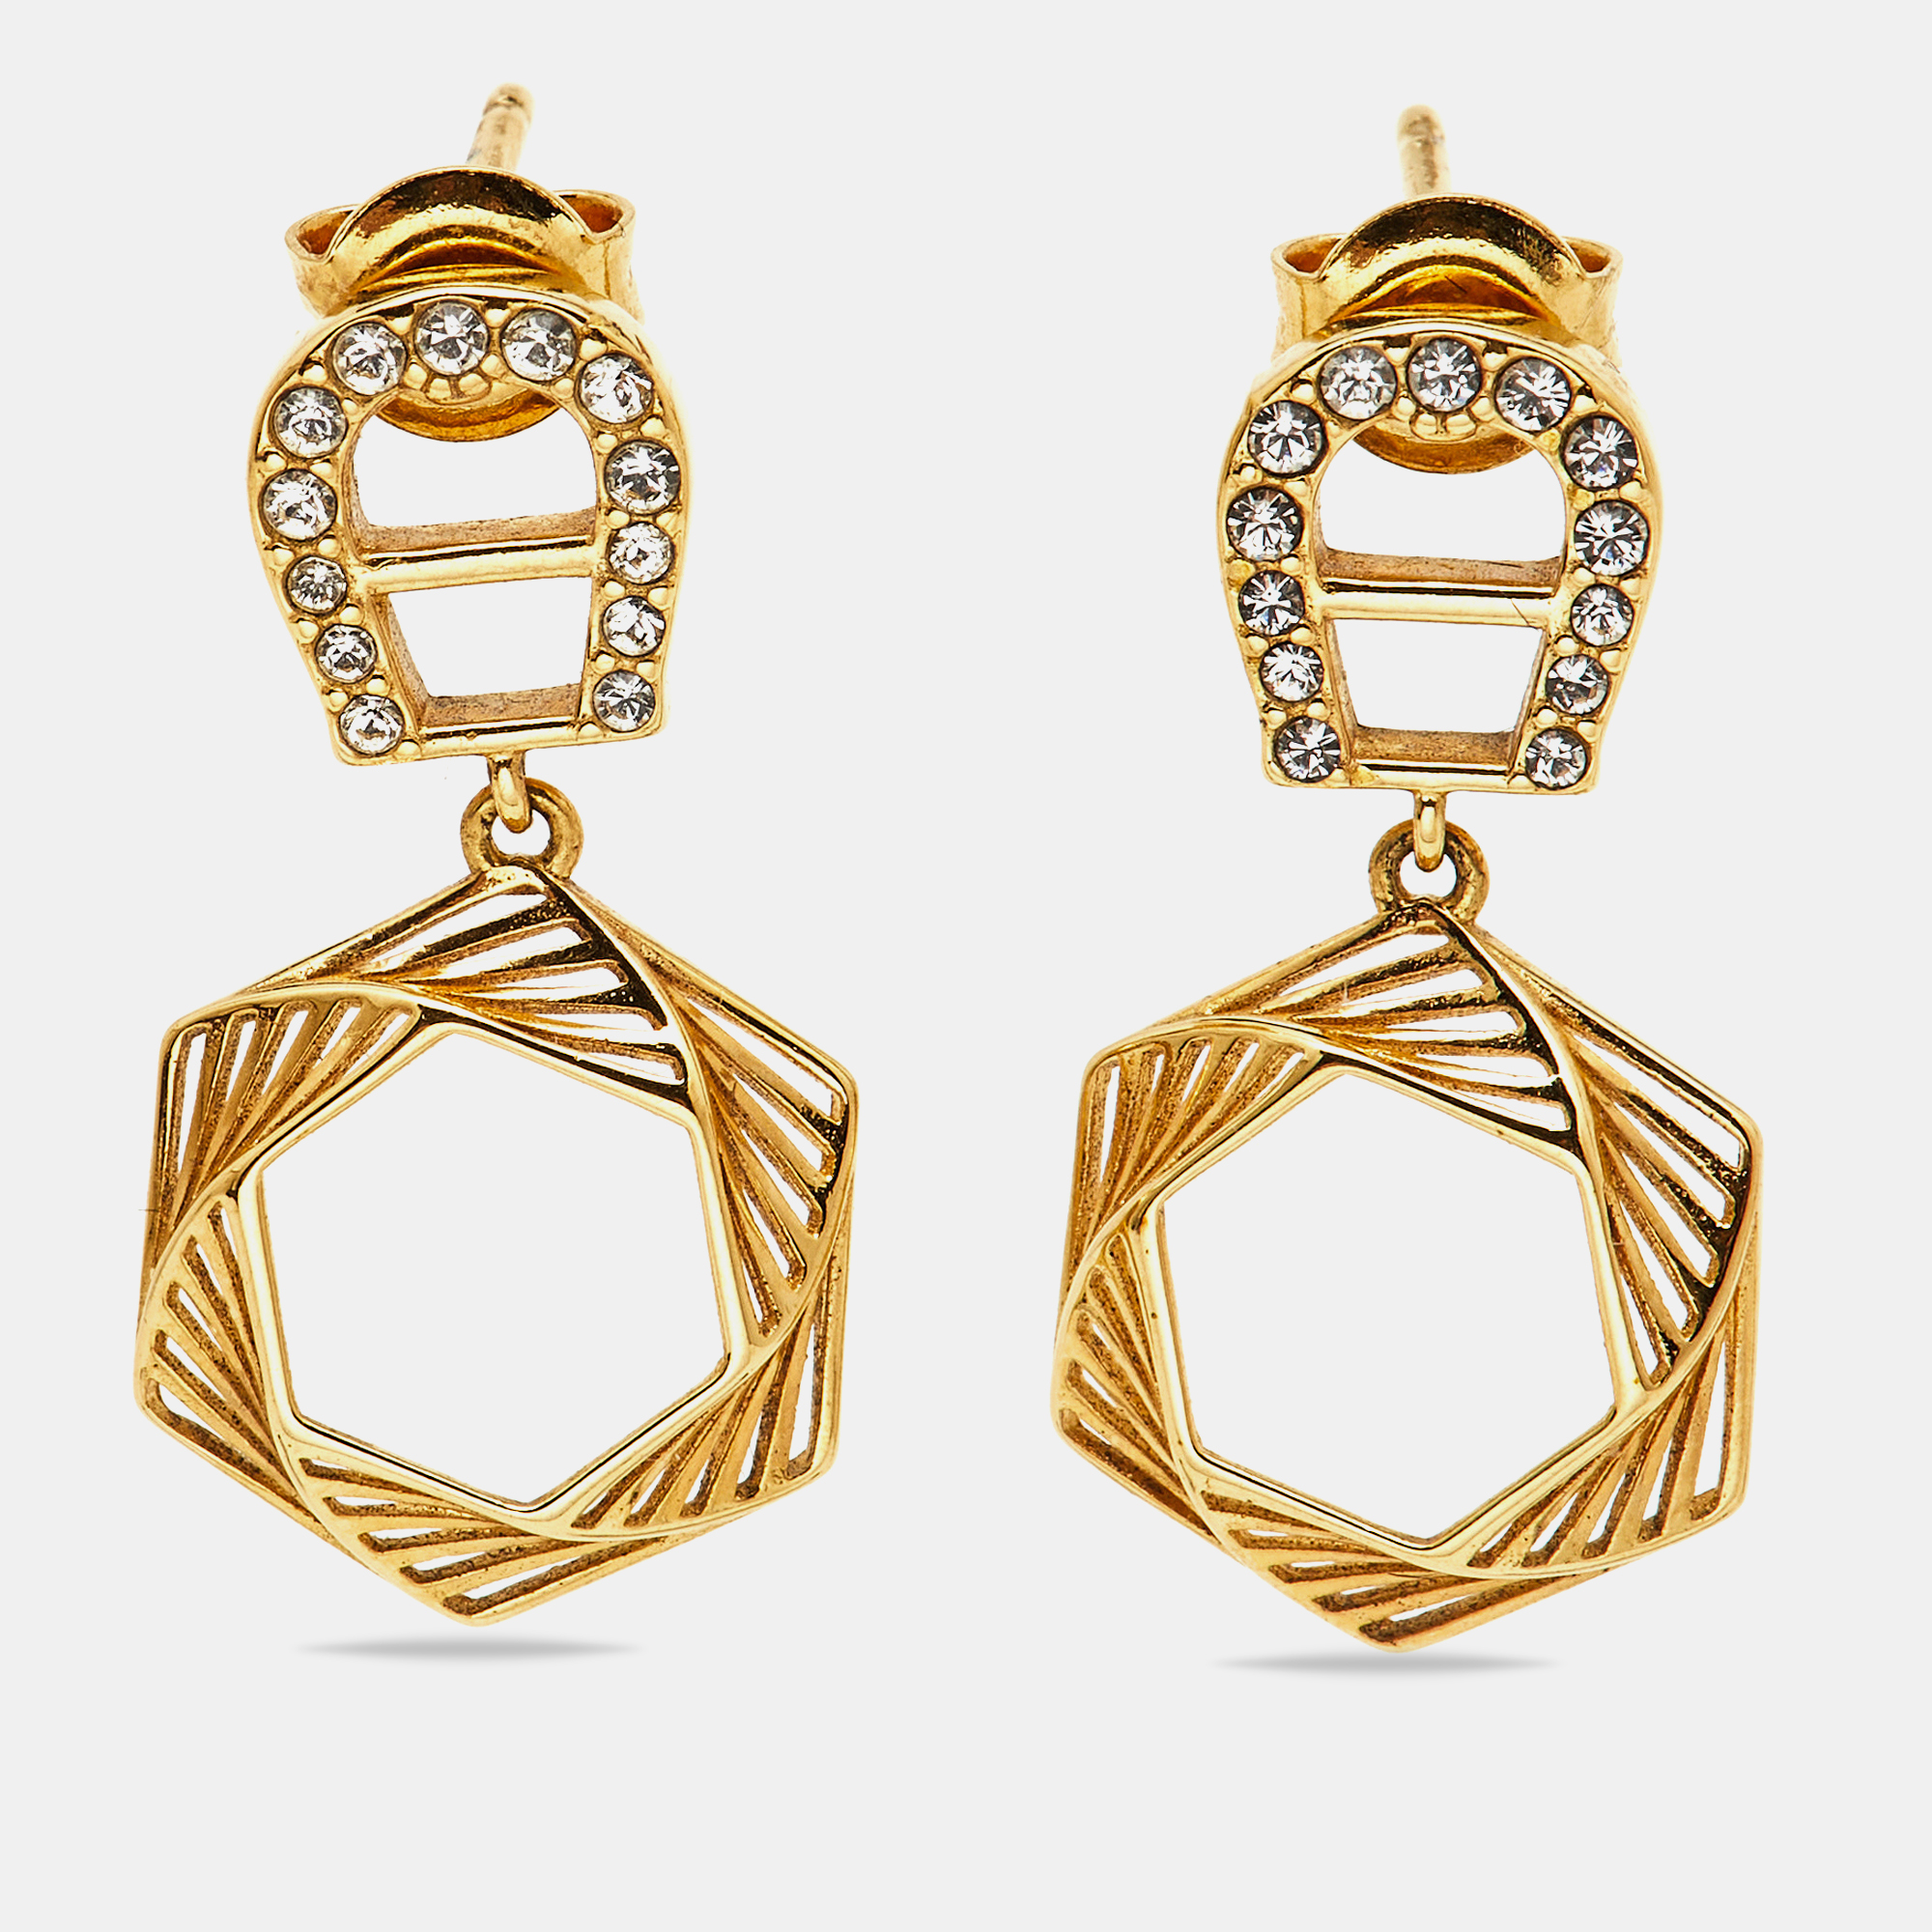 Aigner Gold Tone Crystal Embellished Earrings